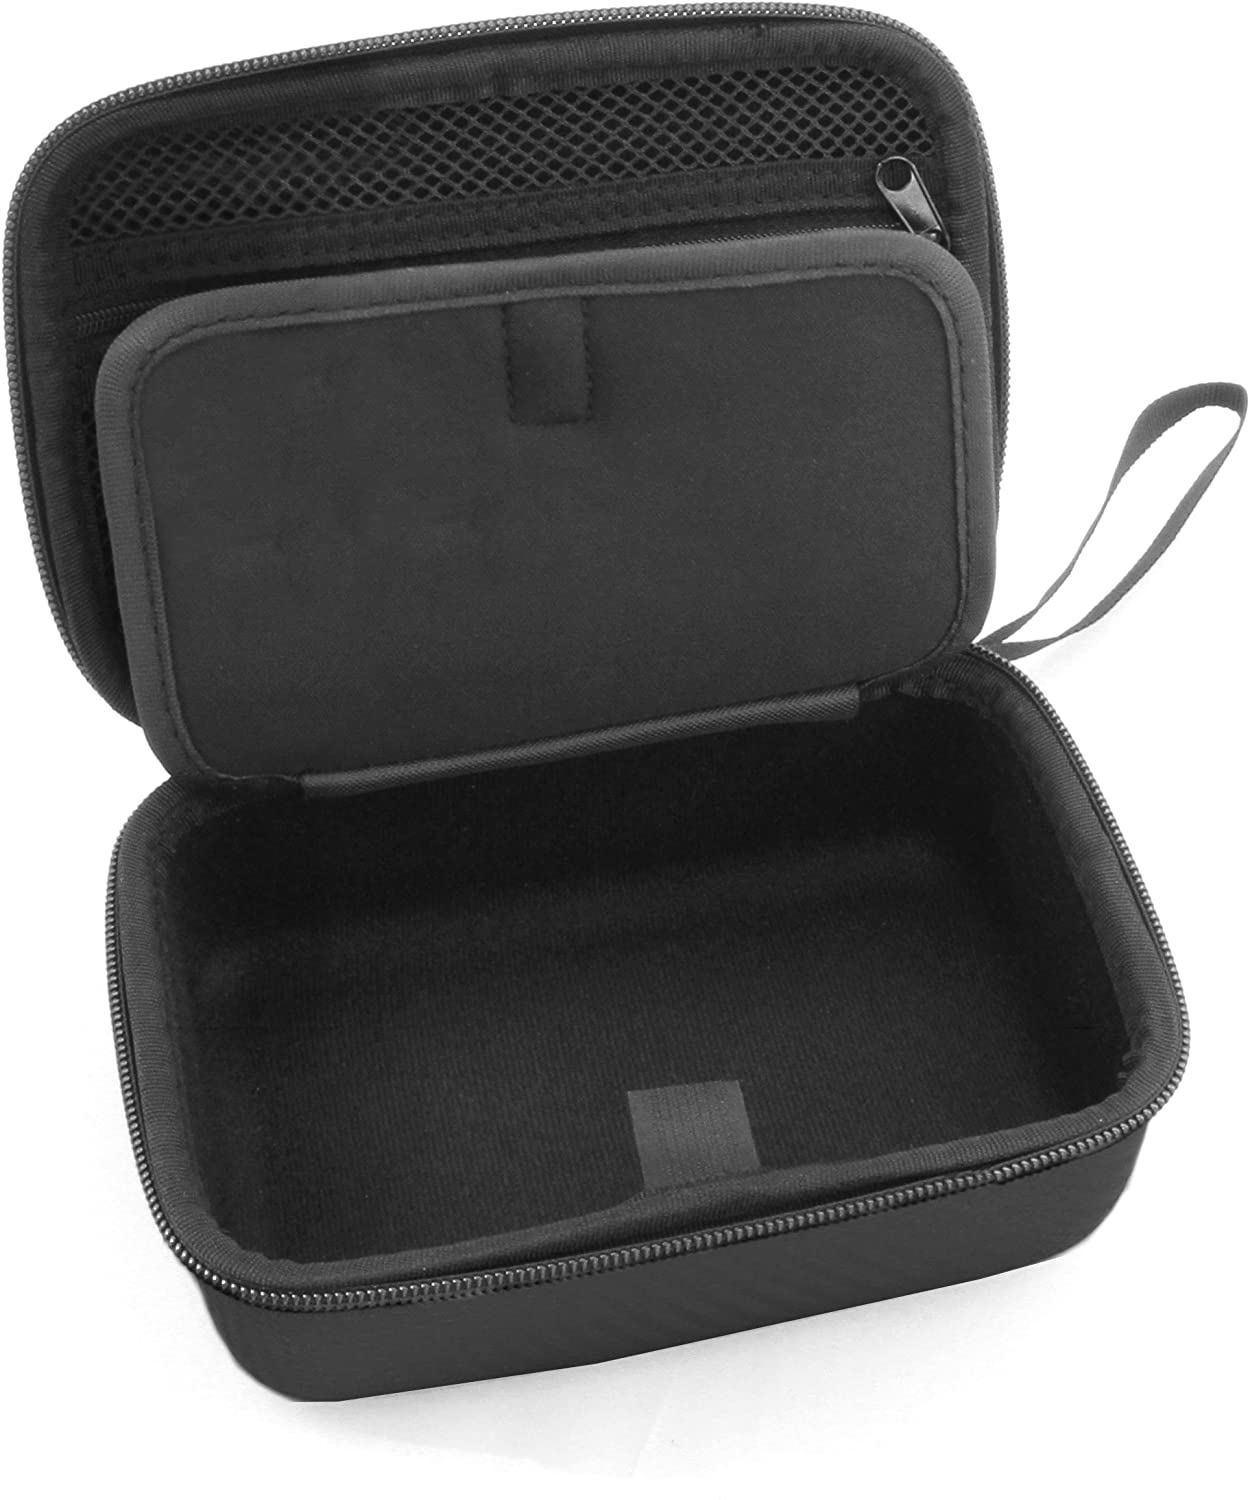 CASEMATIX Carry Case Compatible with Square Terminal POS System Reader,  Will Not Fit Paper or Accessories